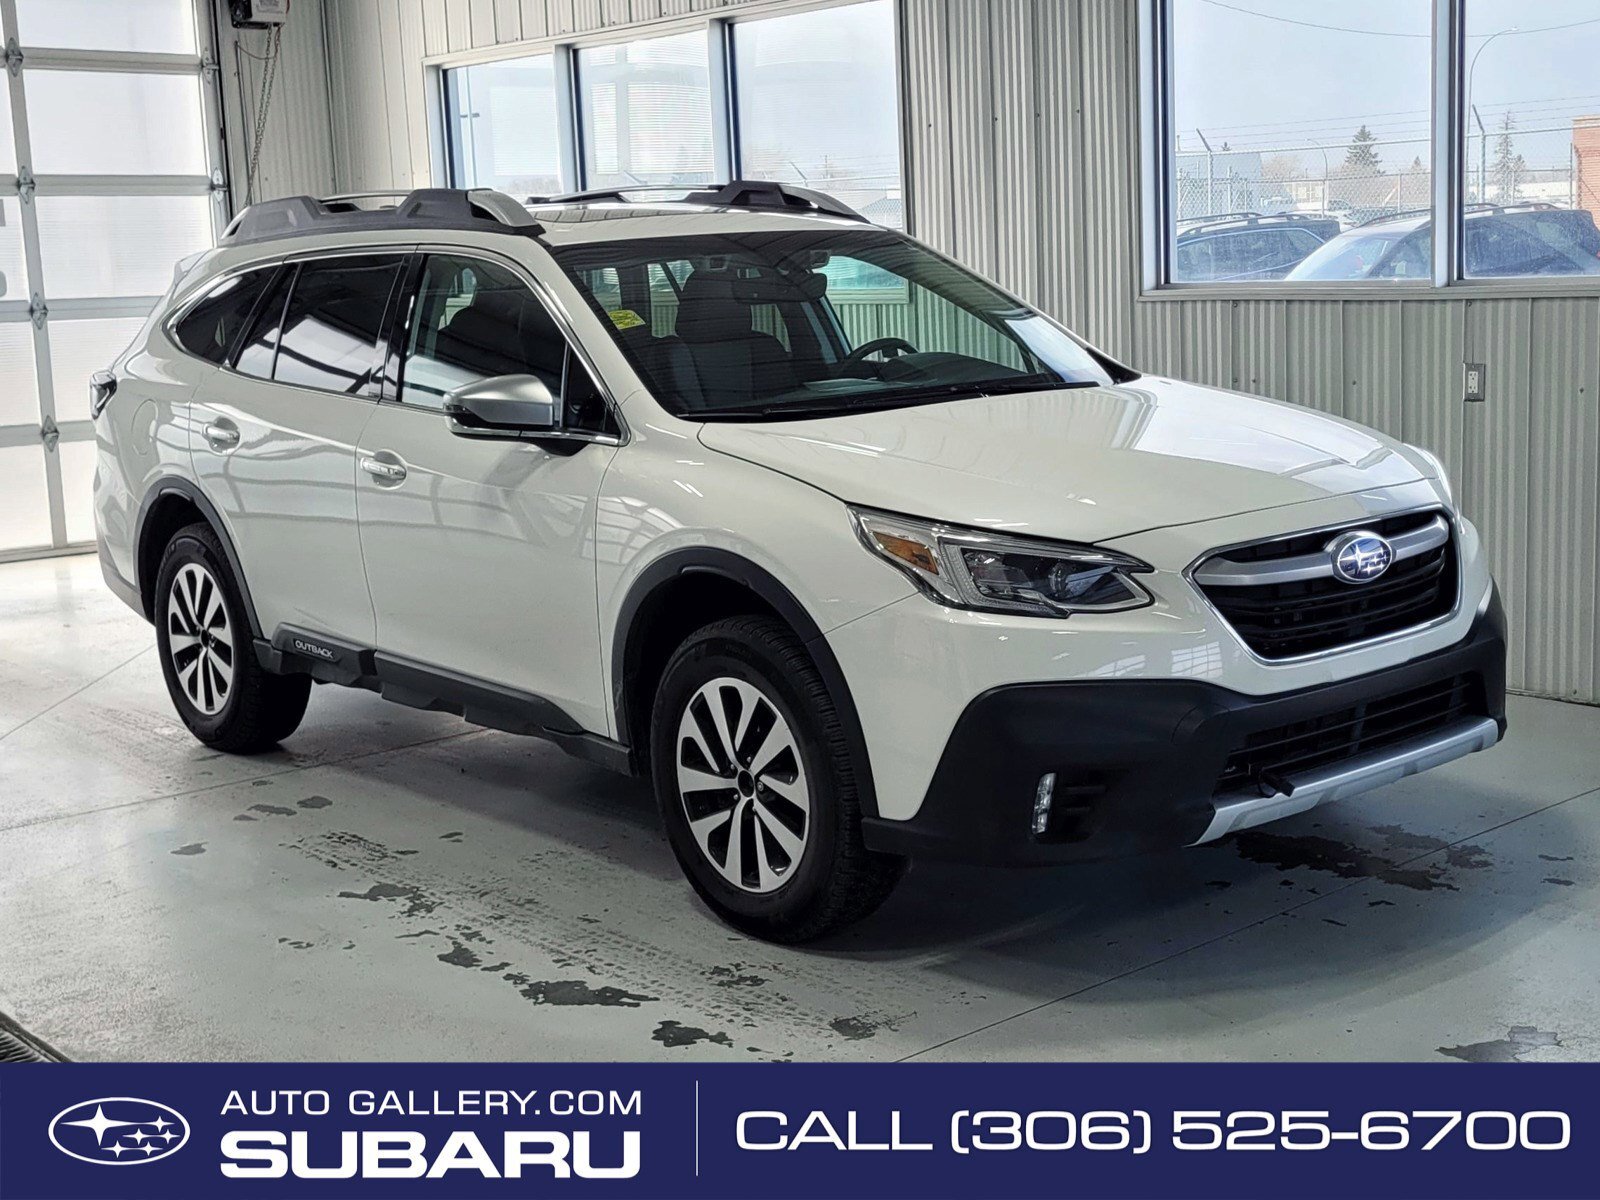 2022 Subaru Outback Premier AWD | FULLY LOADED | BROWN LEATHER INTERIO